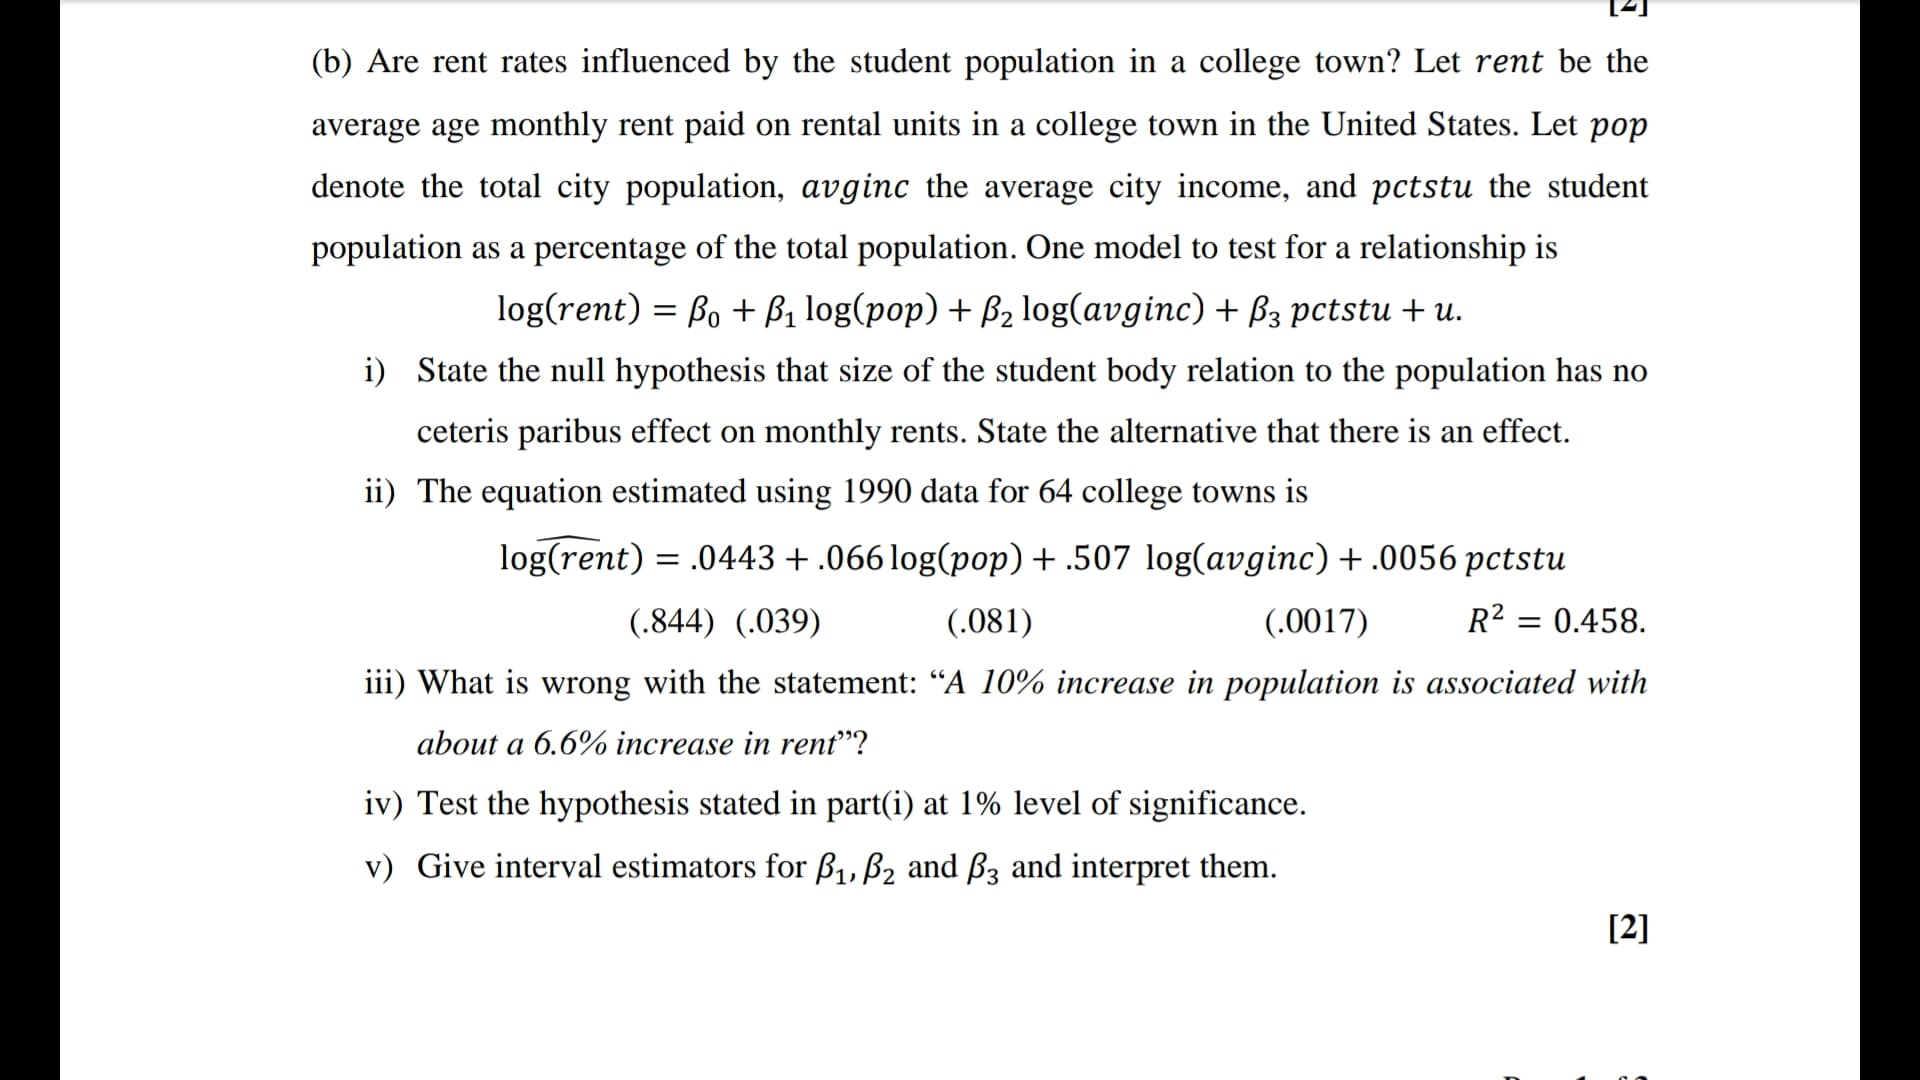 population as a percentage of the total population. One model to test for a relationship is
log(rent) = Bo + ß1 log(pop) + B2 log(avginc) + B3 pctstu + u.
i) State the null hypothesis that size of the student body relation to the population has no
ceteris paribus effect on monthly rents. State the alternative that there is an effect.
ii) The equation estimated using 1990 data for 64 college towns is
log(rent) = .0443+.066 log(pop) + .507 log(avginc) + .0056 pctstu
(.844) (.039)
(.081)
(.0017)
R² = 0.458.
iii) What is wrong with the statement: “A 10% increase in population is associated with
about a 6.6% increase in rent"?
iv) Test the hypothesis stated in part(i) at 1% level of significance.
v) Give interval estimators for ß1, B2 and B3 and interpret them.
